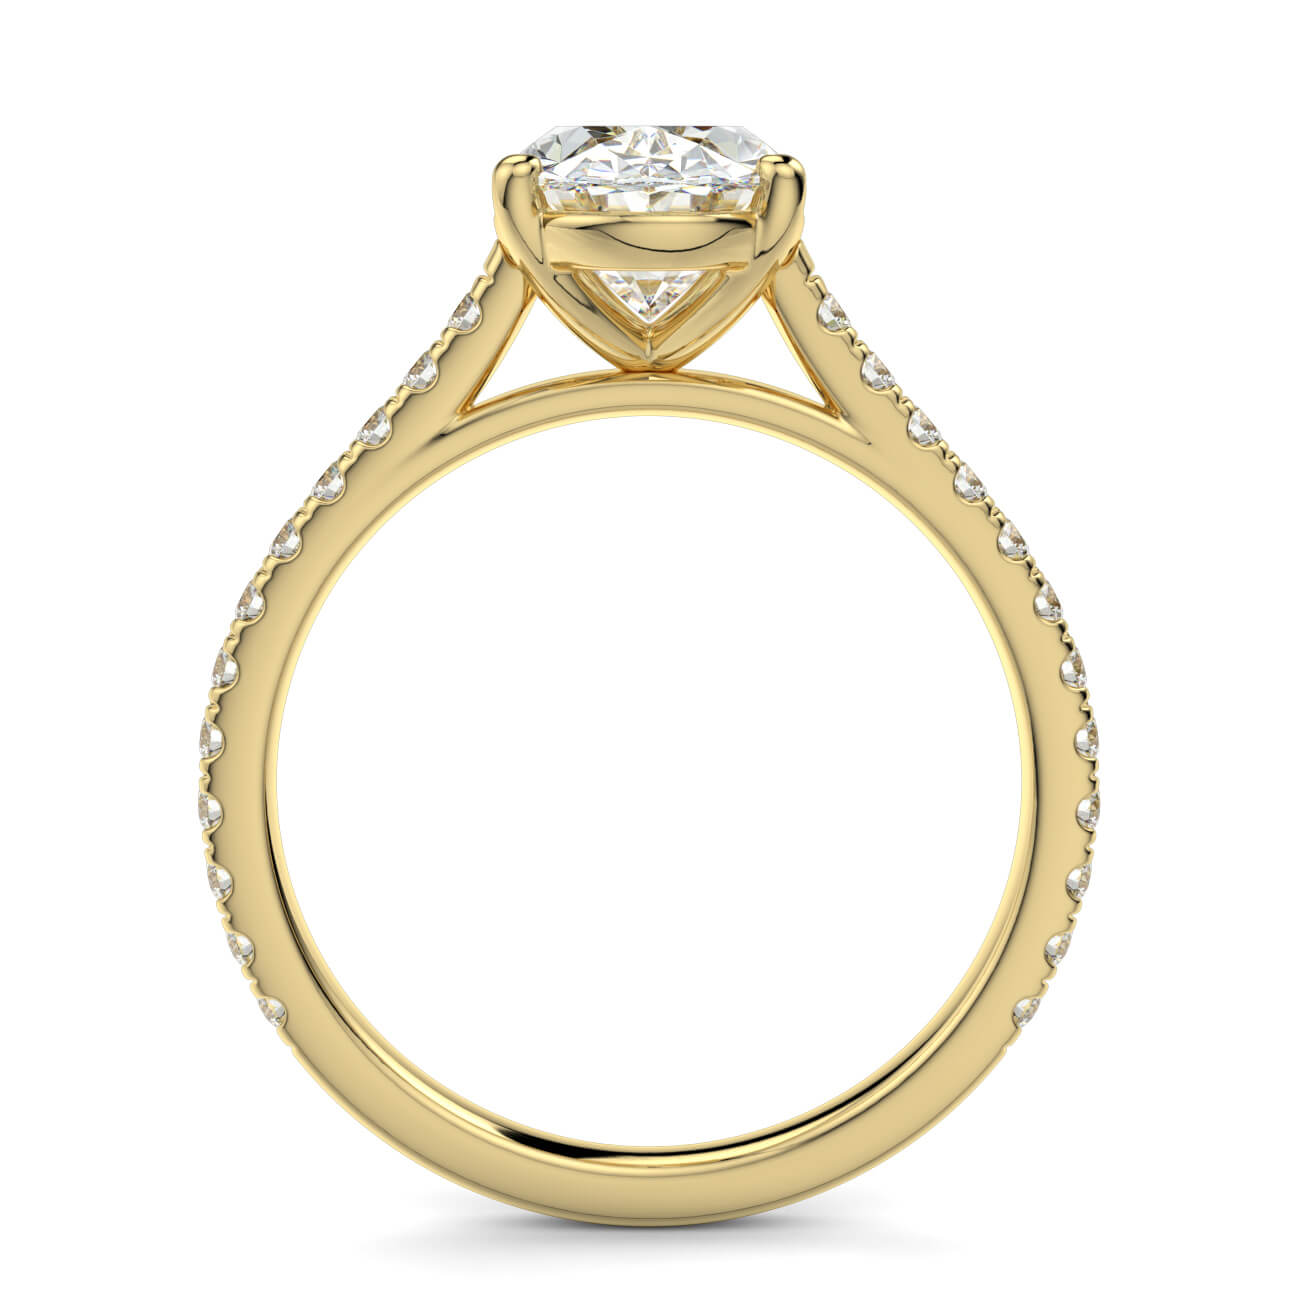 Oval shape diamond cathedral engagement ring in yellow gold – Australian Diamond Network